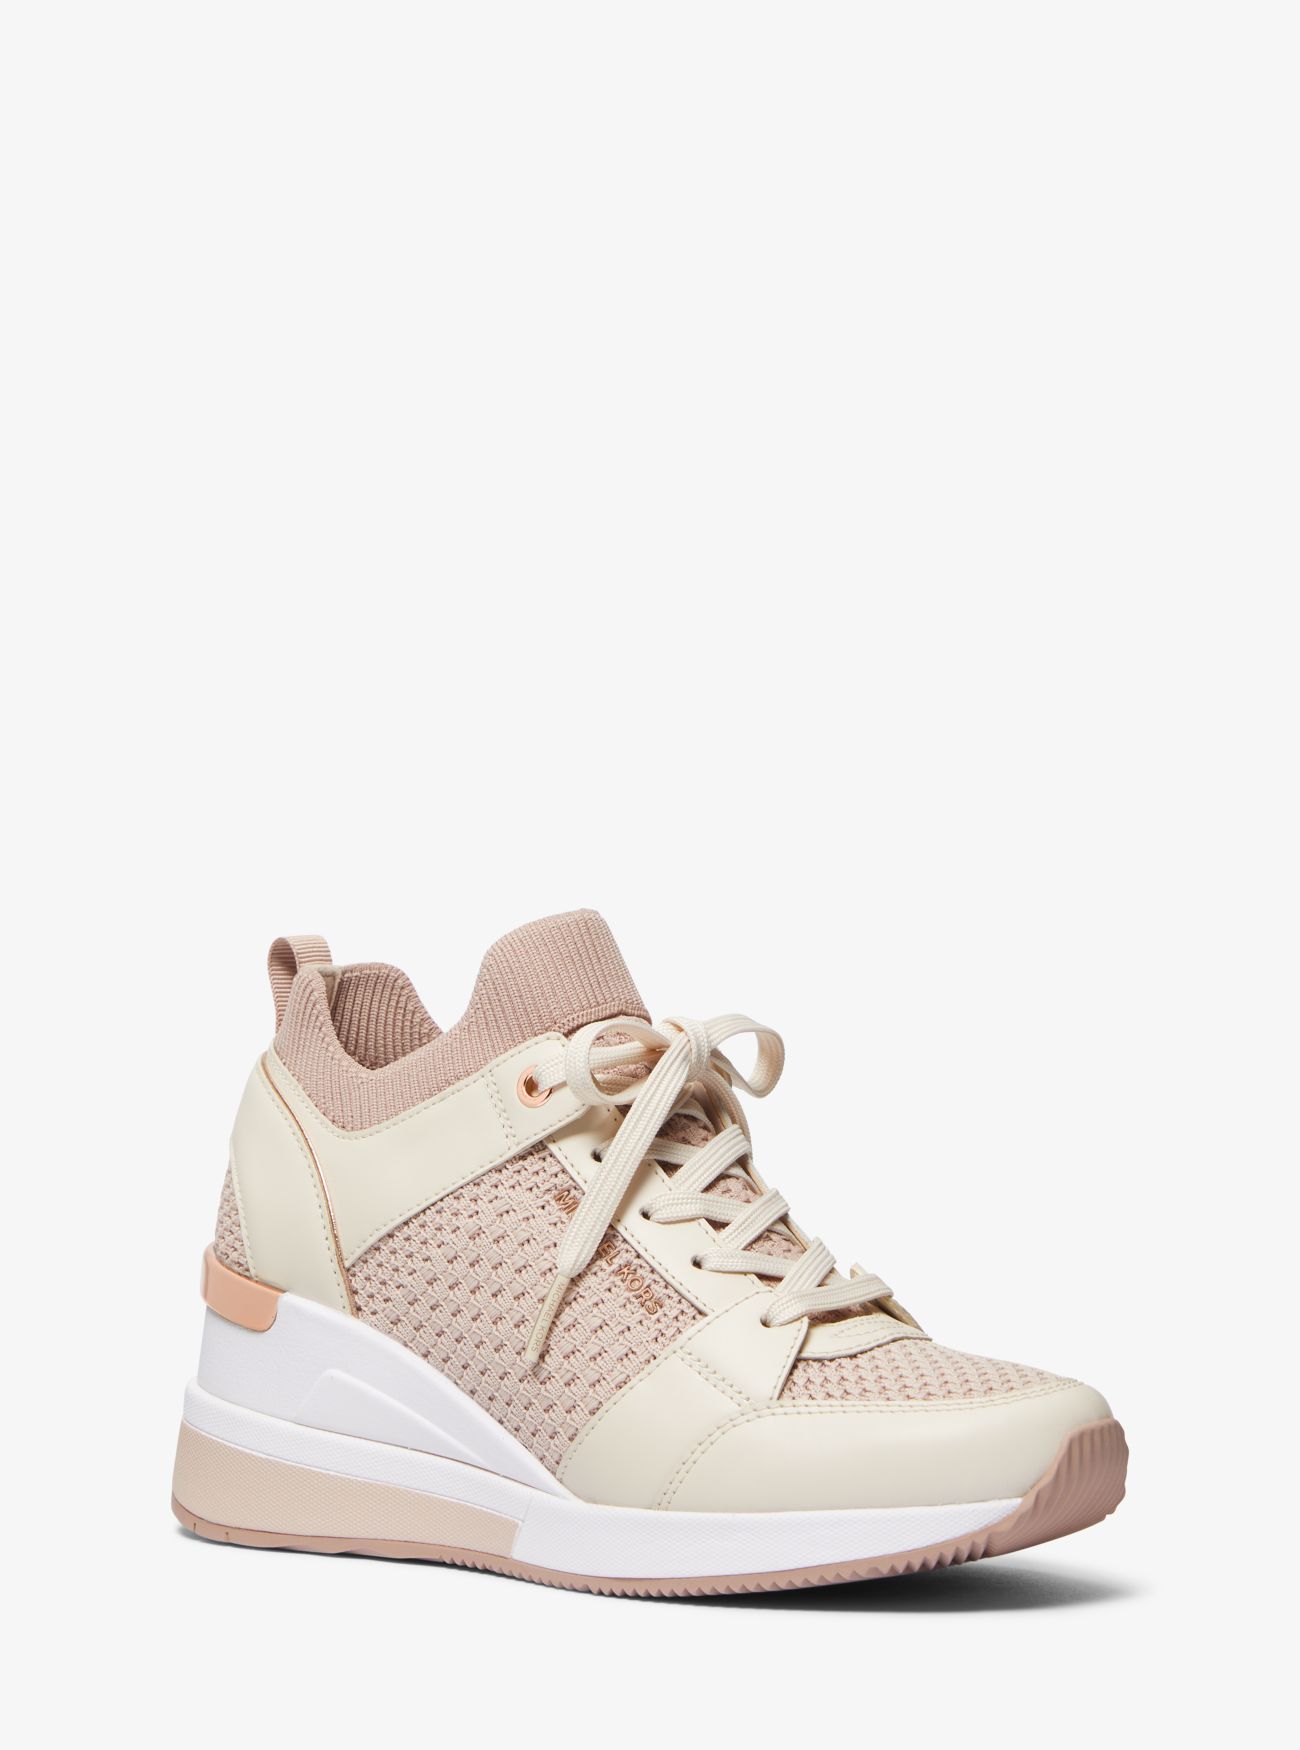 MK Georgie Textured Knit and Leather Trainer - Pink - Michael Kors